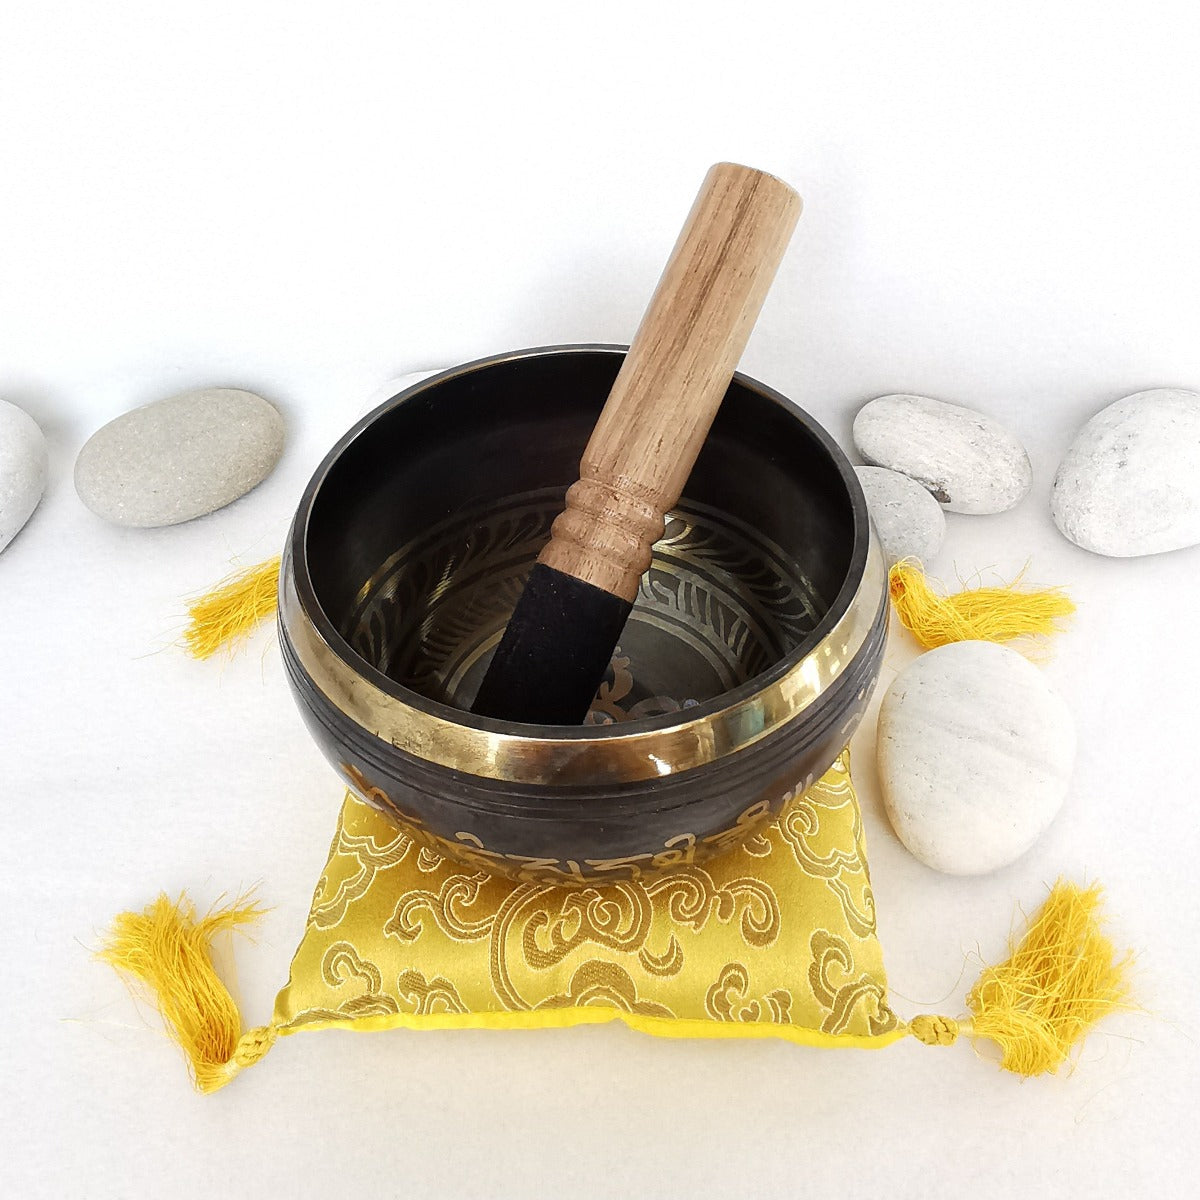 Singing Bowl 17L from Nepal